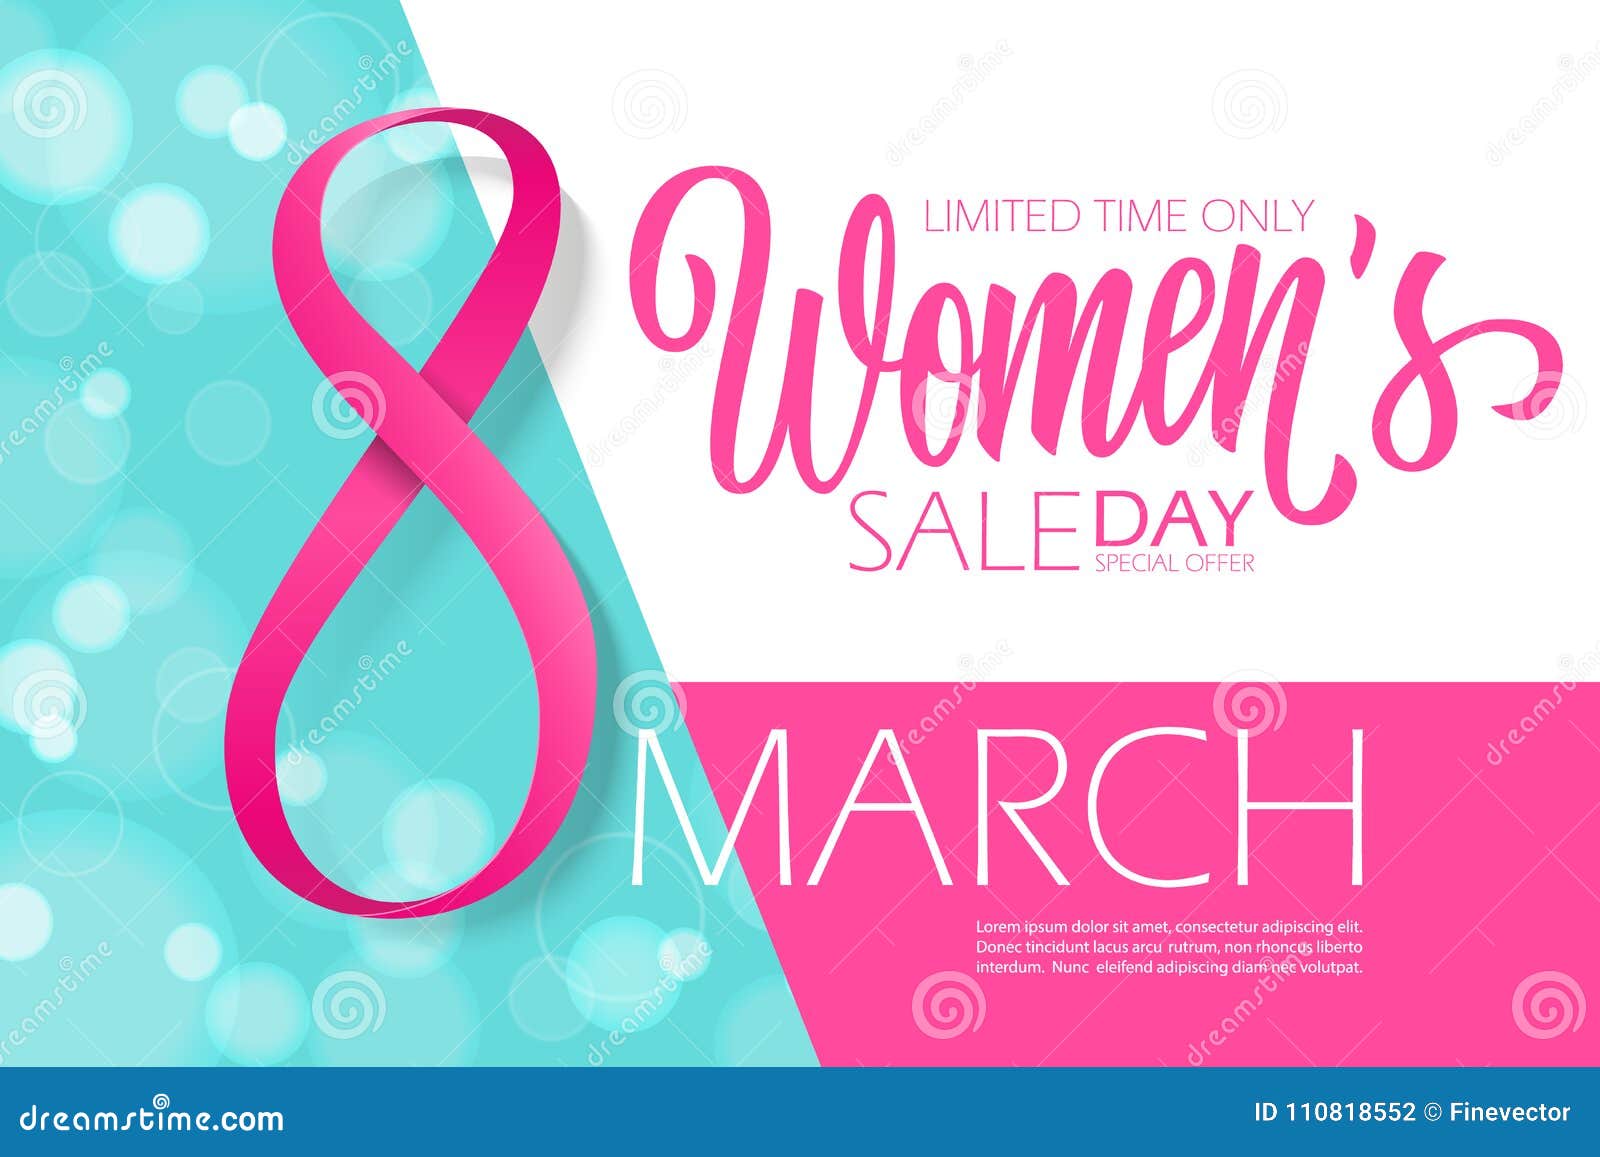 https://thumbs.dreamstime.com/z/march-happy-women-s-day-special-offer-banner-hand-drawn-lettering-holiday-shopping-business-promotion-advertising-110818552.jpg